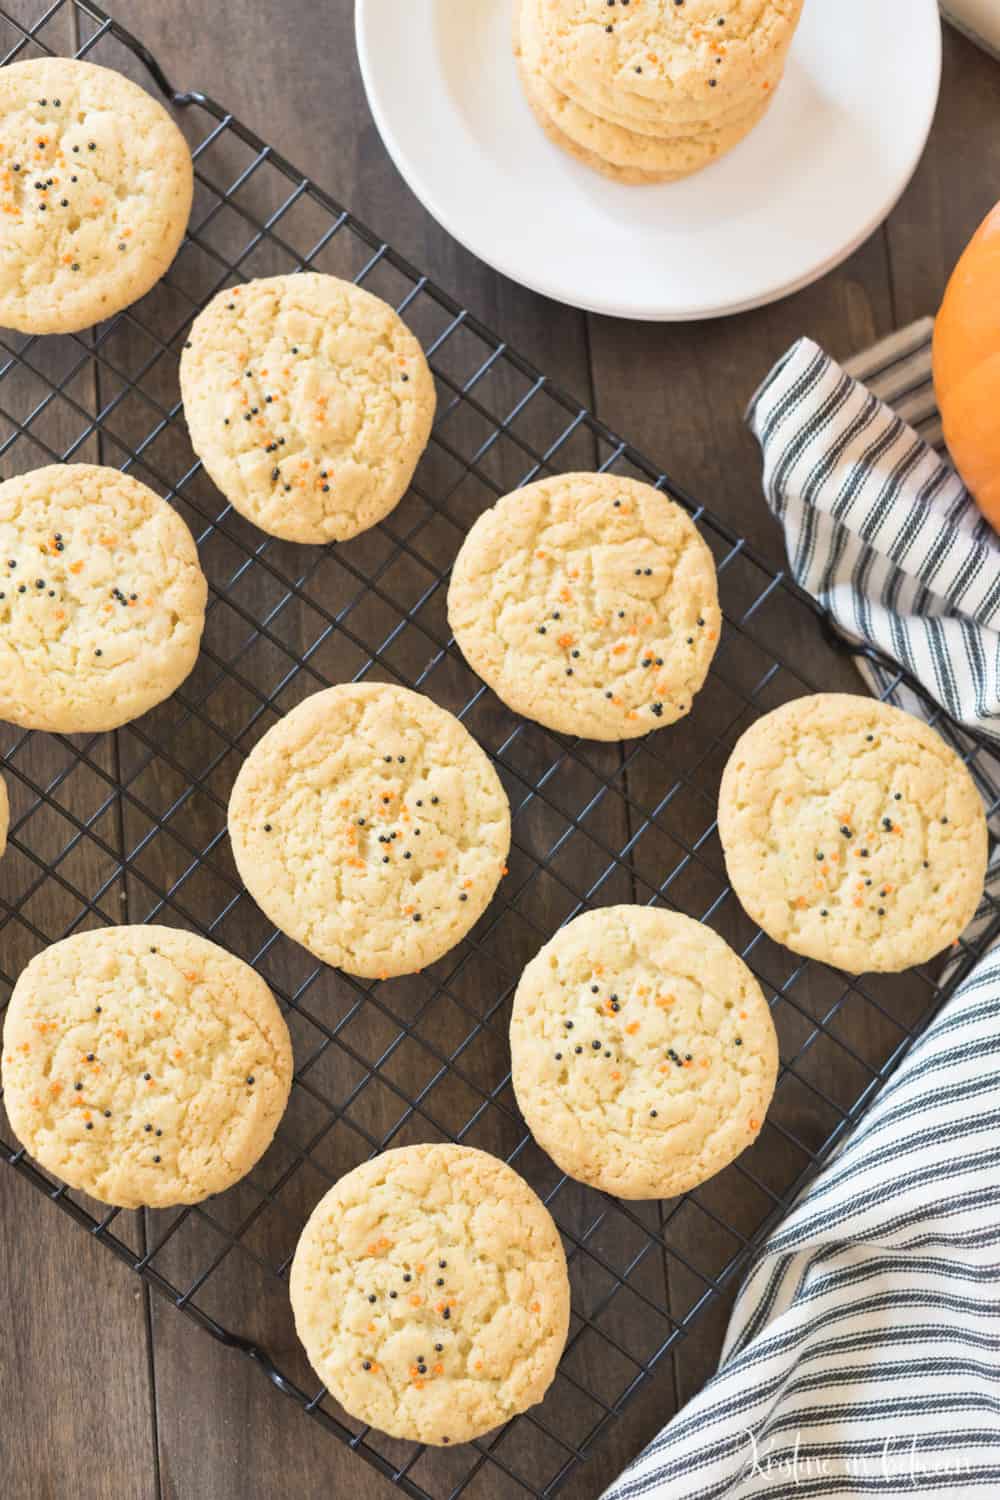 These are the perfect easy Halloween cookies that can be made in under 30 minutes.